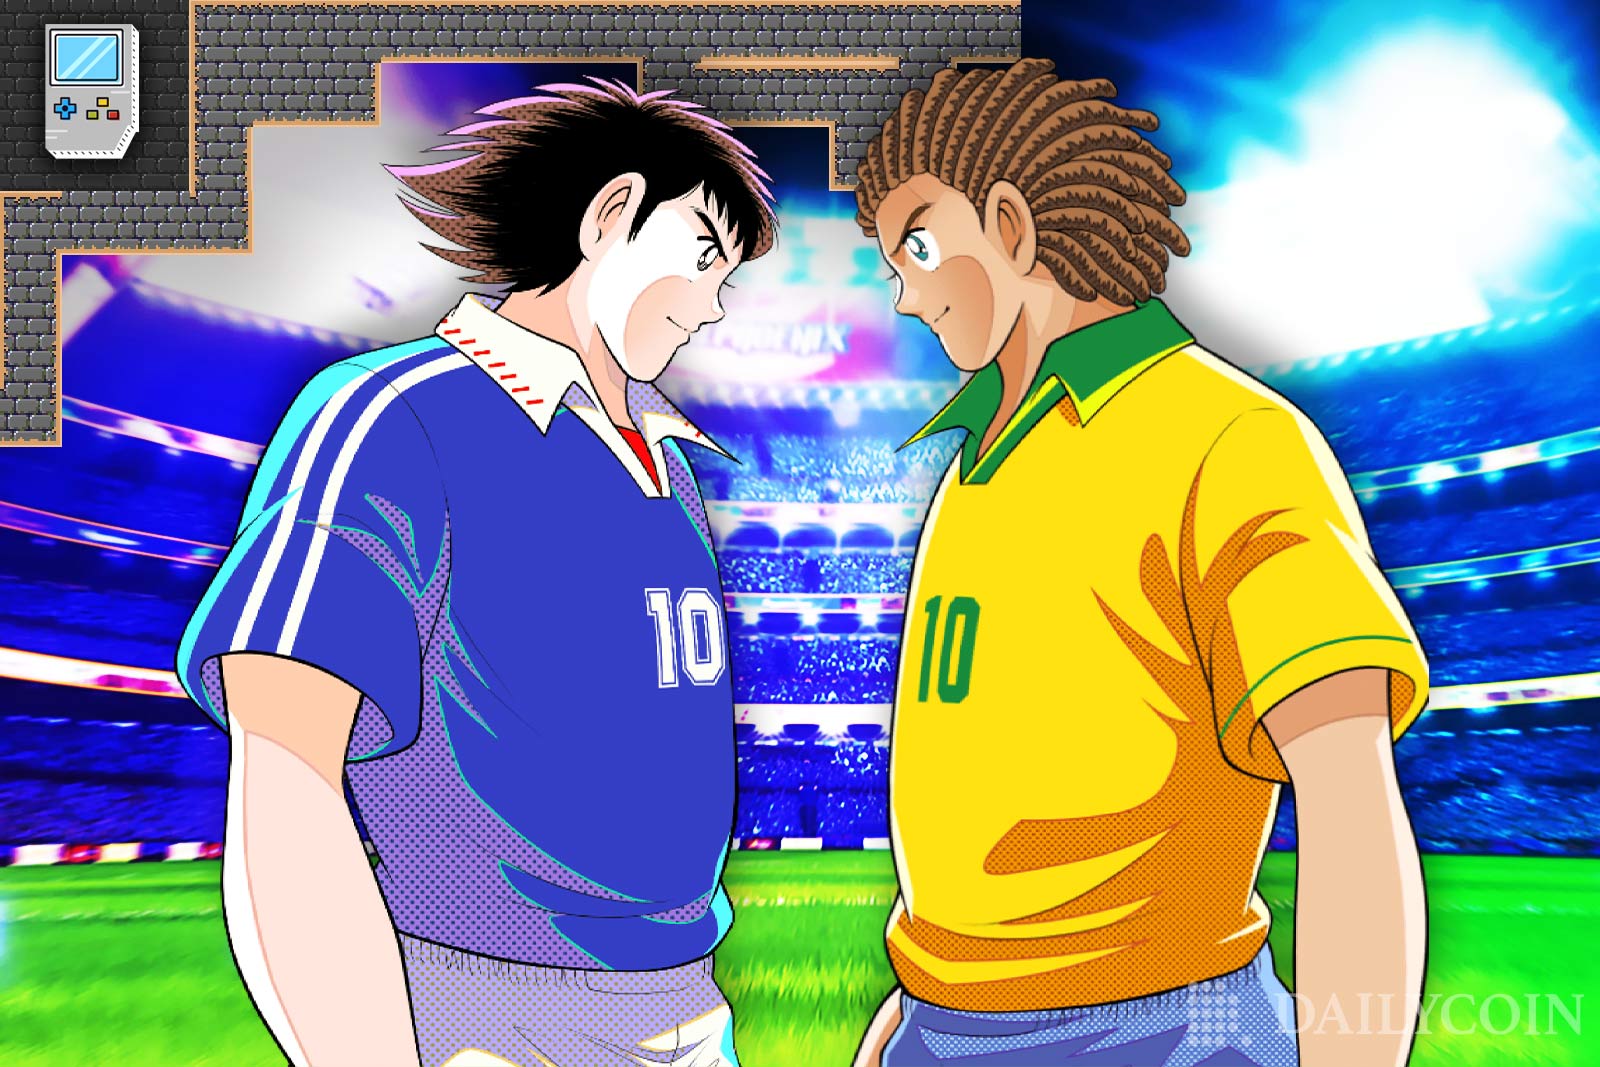 Captain Tsubasa Comes to the Blockchain with the Release of Rivals -  DailyCoin